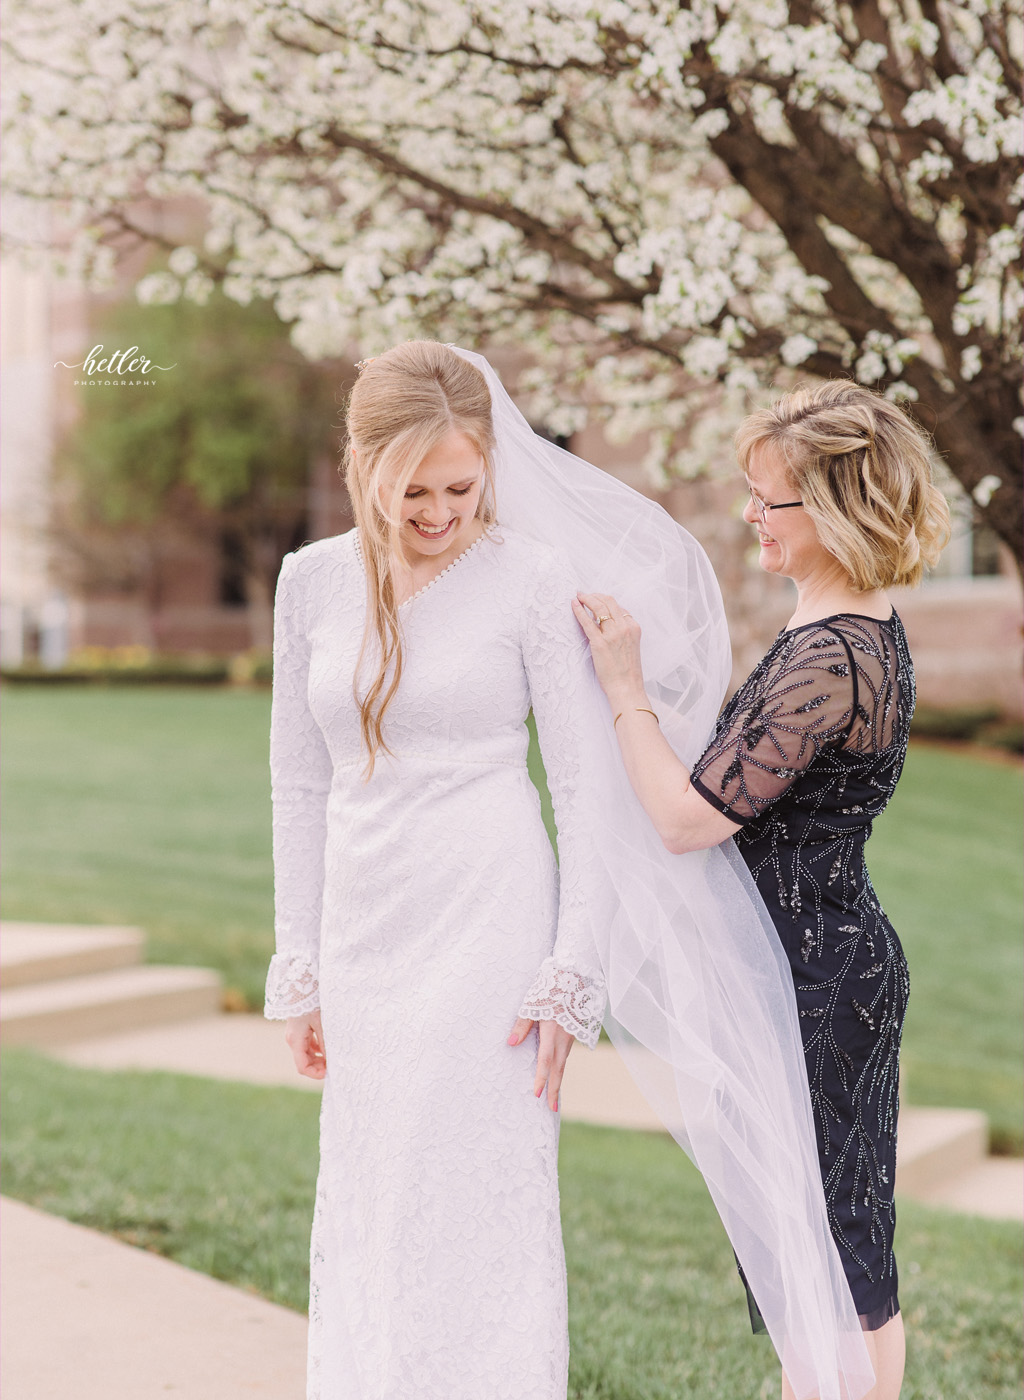 Spring wedding in Warsaw Indiana with a lace wedding gown and cathedral veil